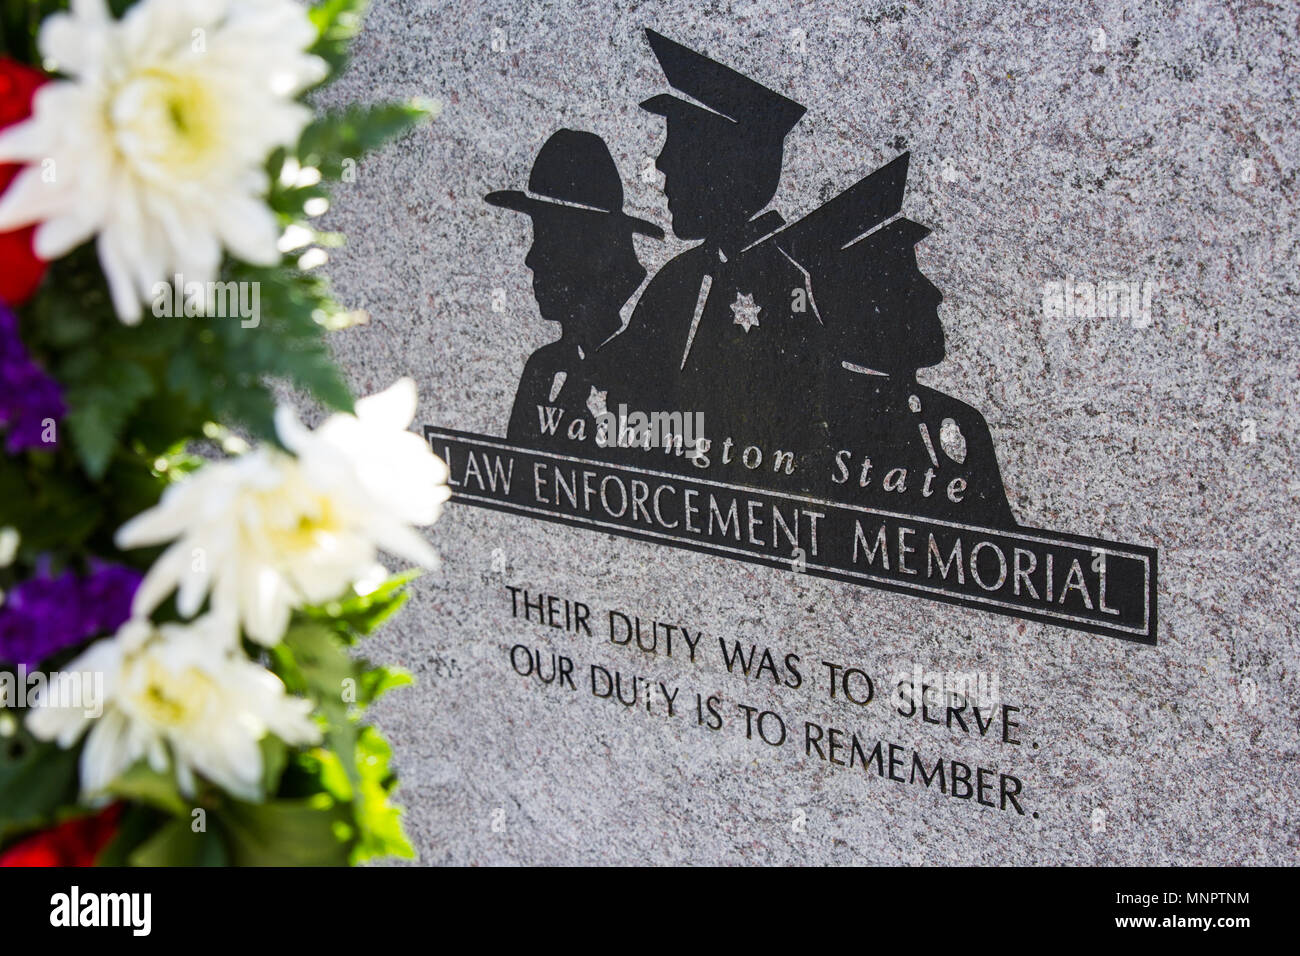 Olympia, Washington / USA - May 5, 2018:  Washington State Law Enforcement Memorial outside of the State Capitol building. Stock Photo